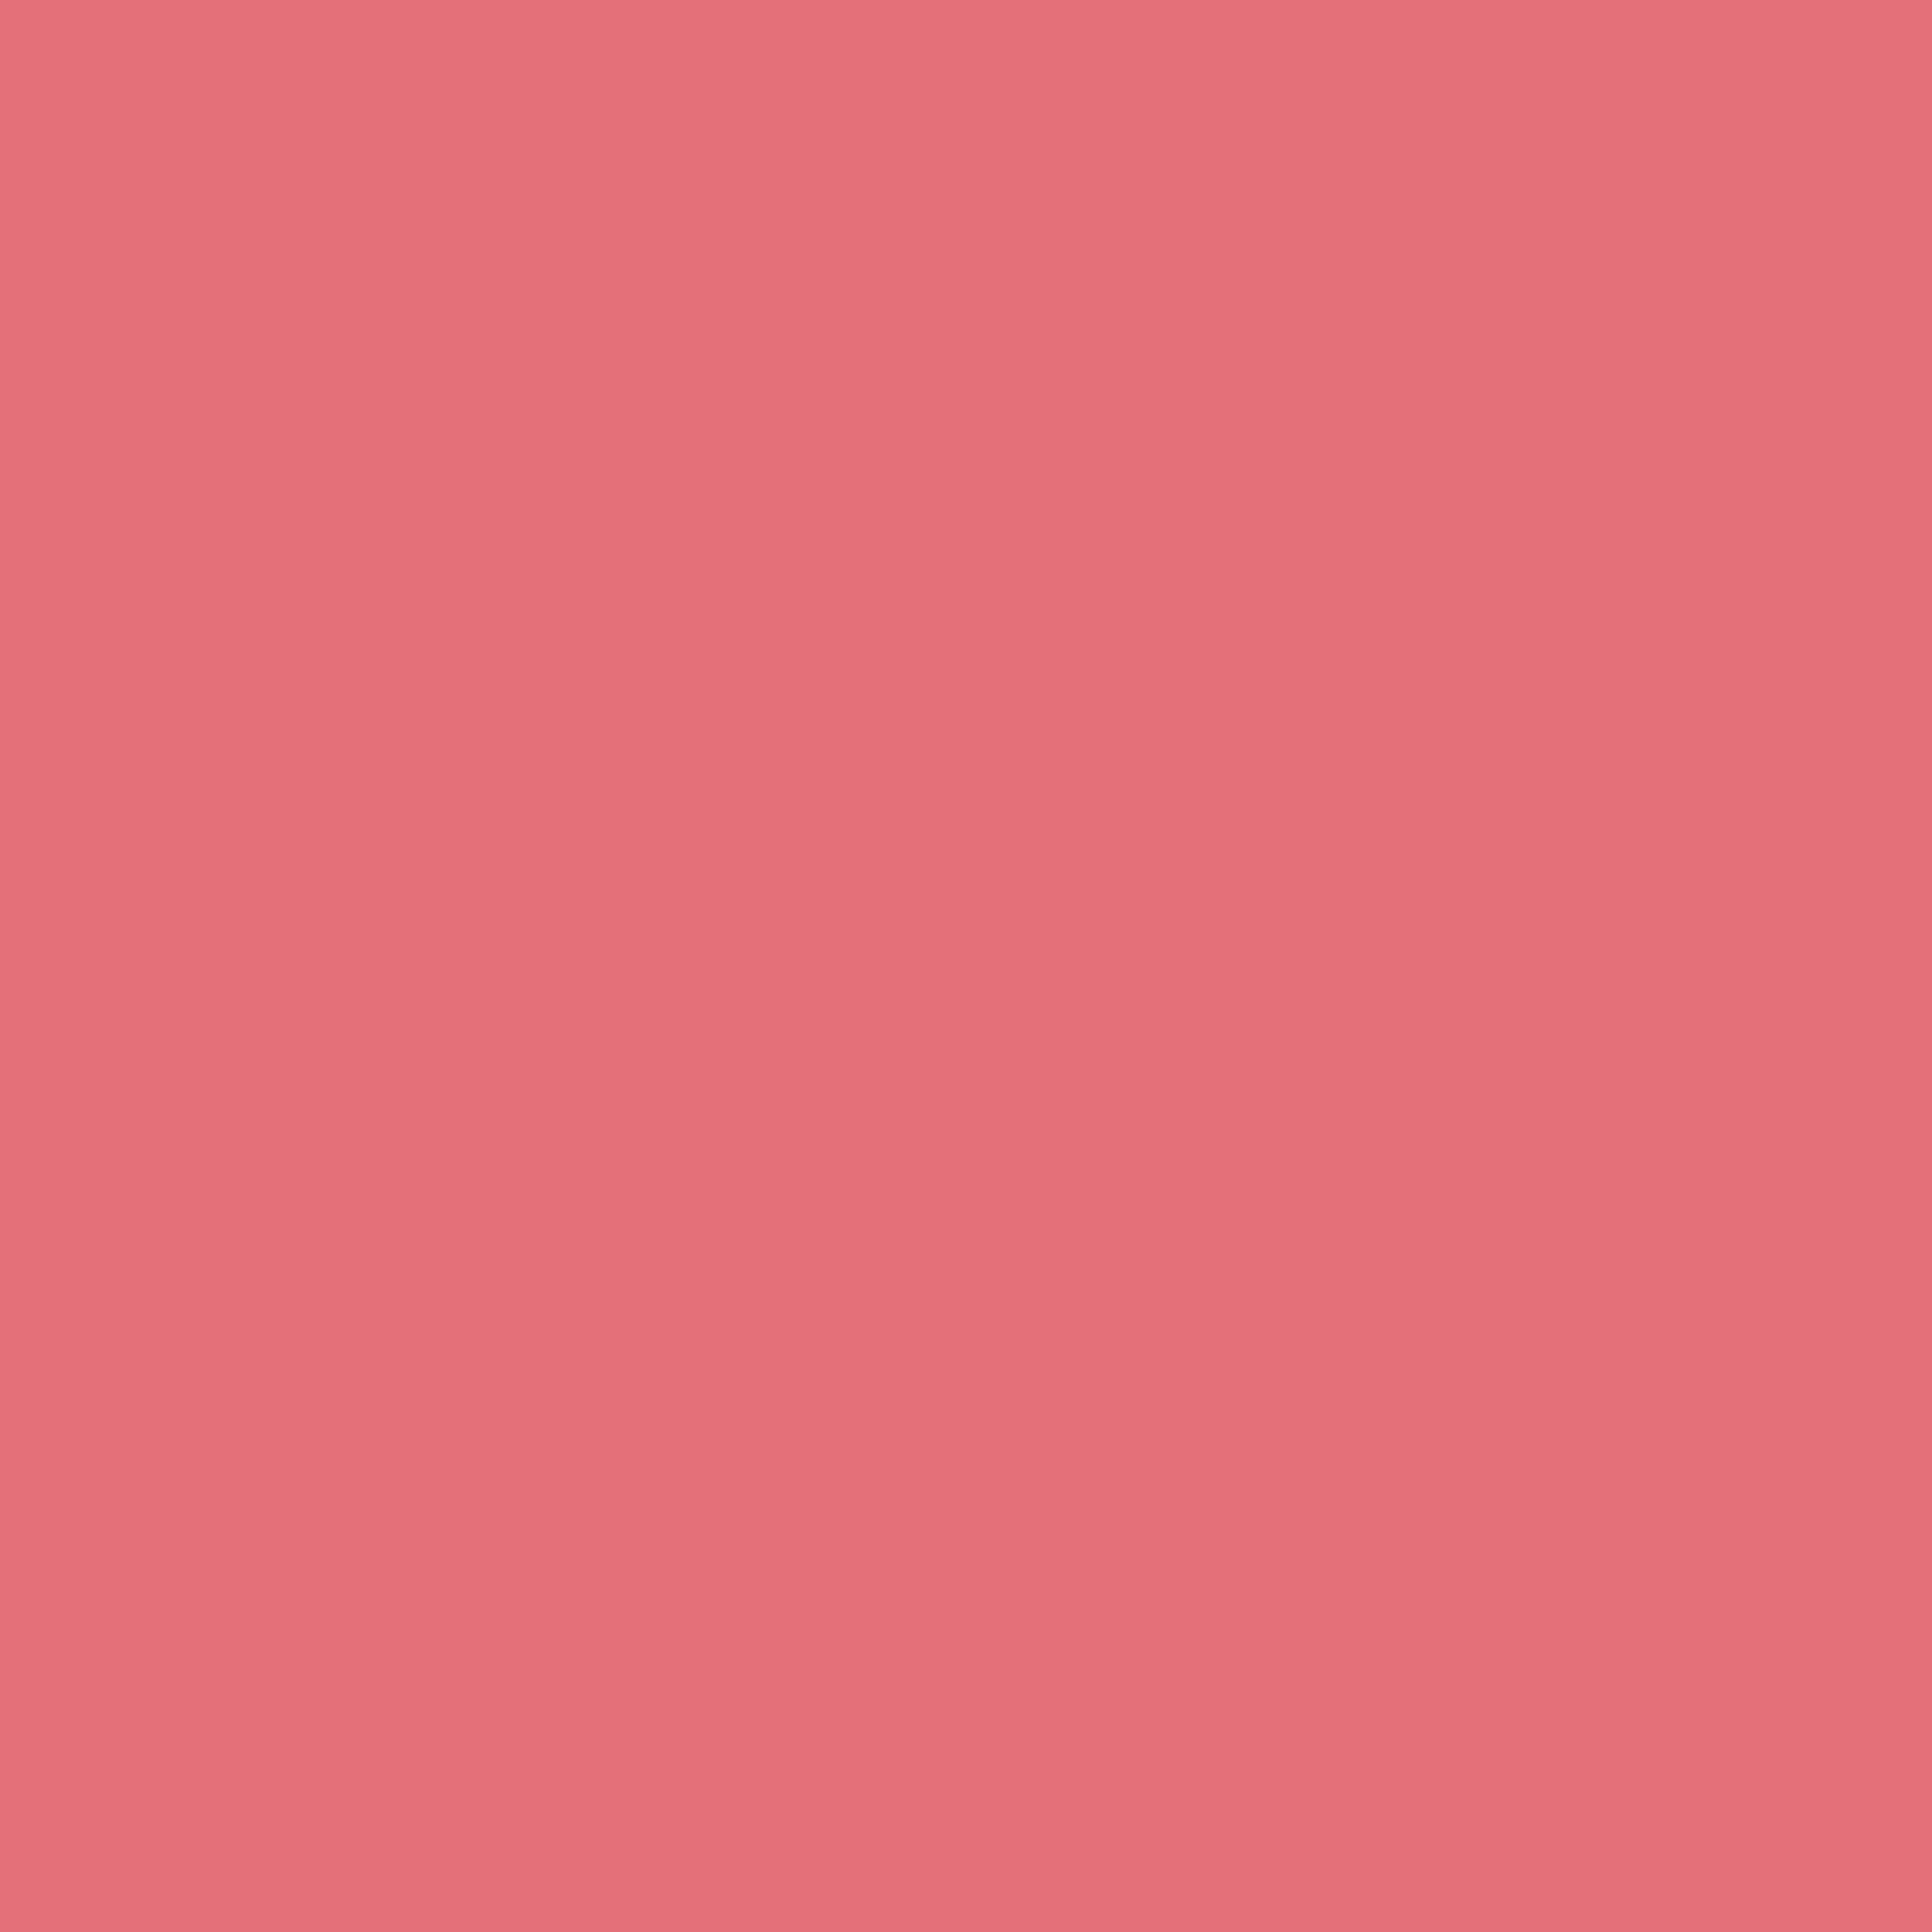 3600x3600 Tango Pink Solid Color Background